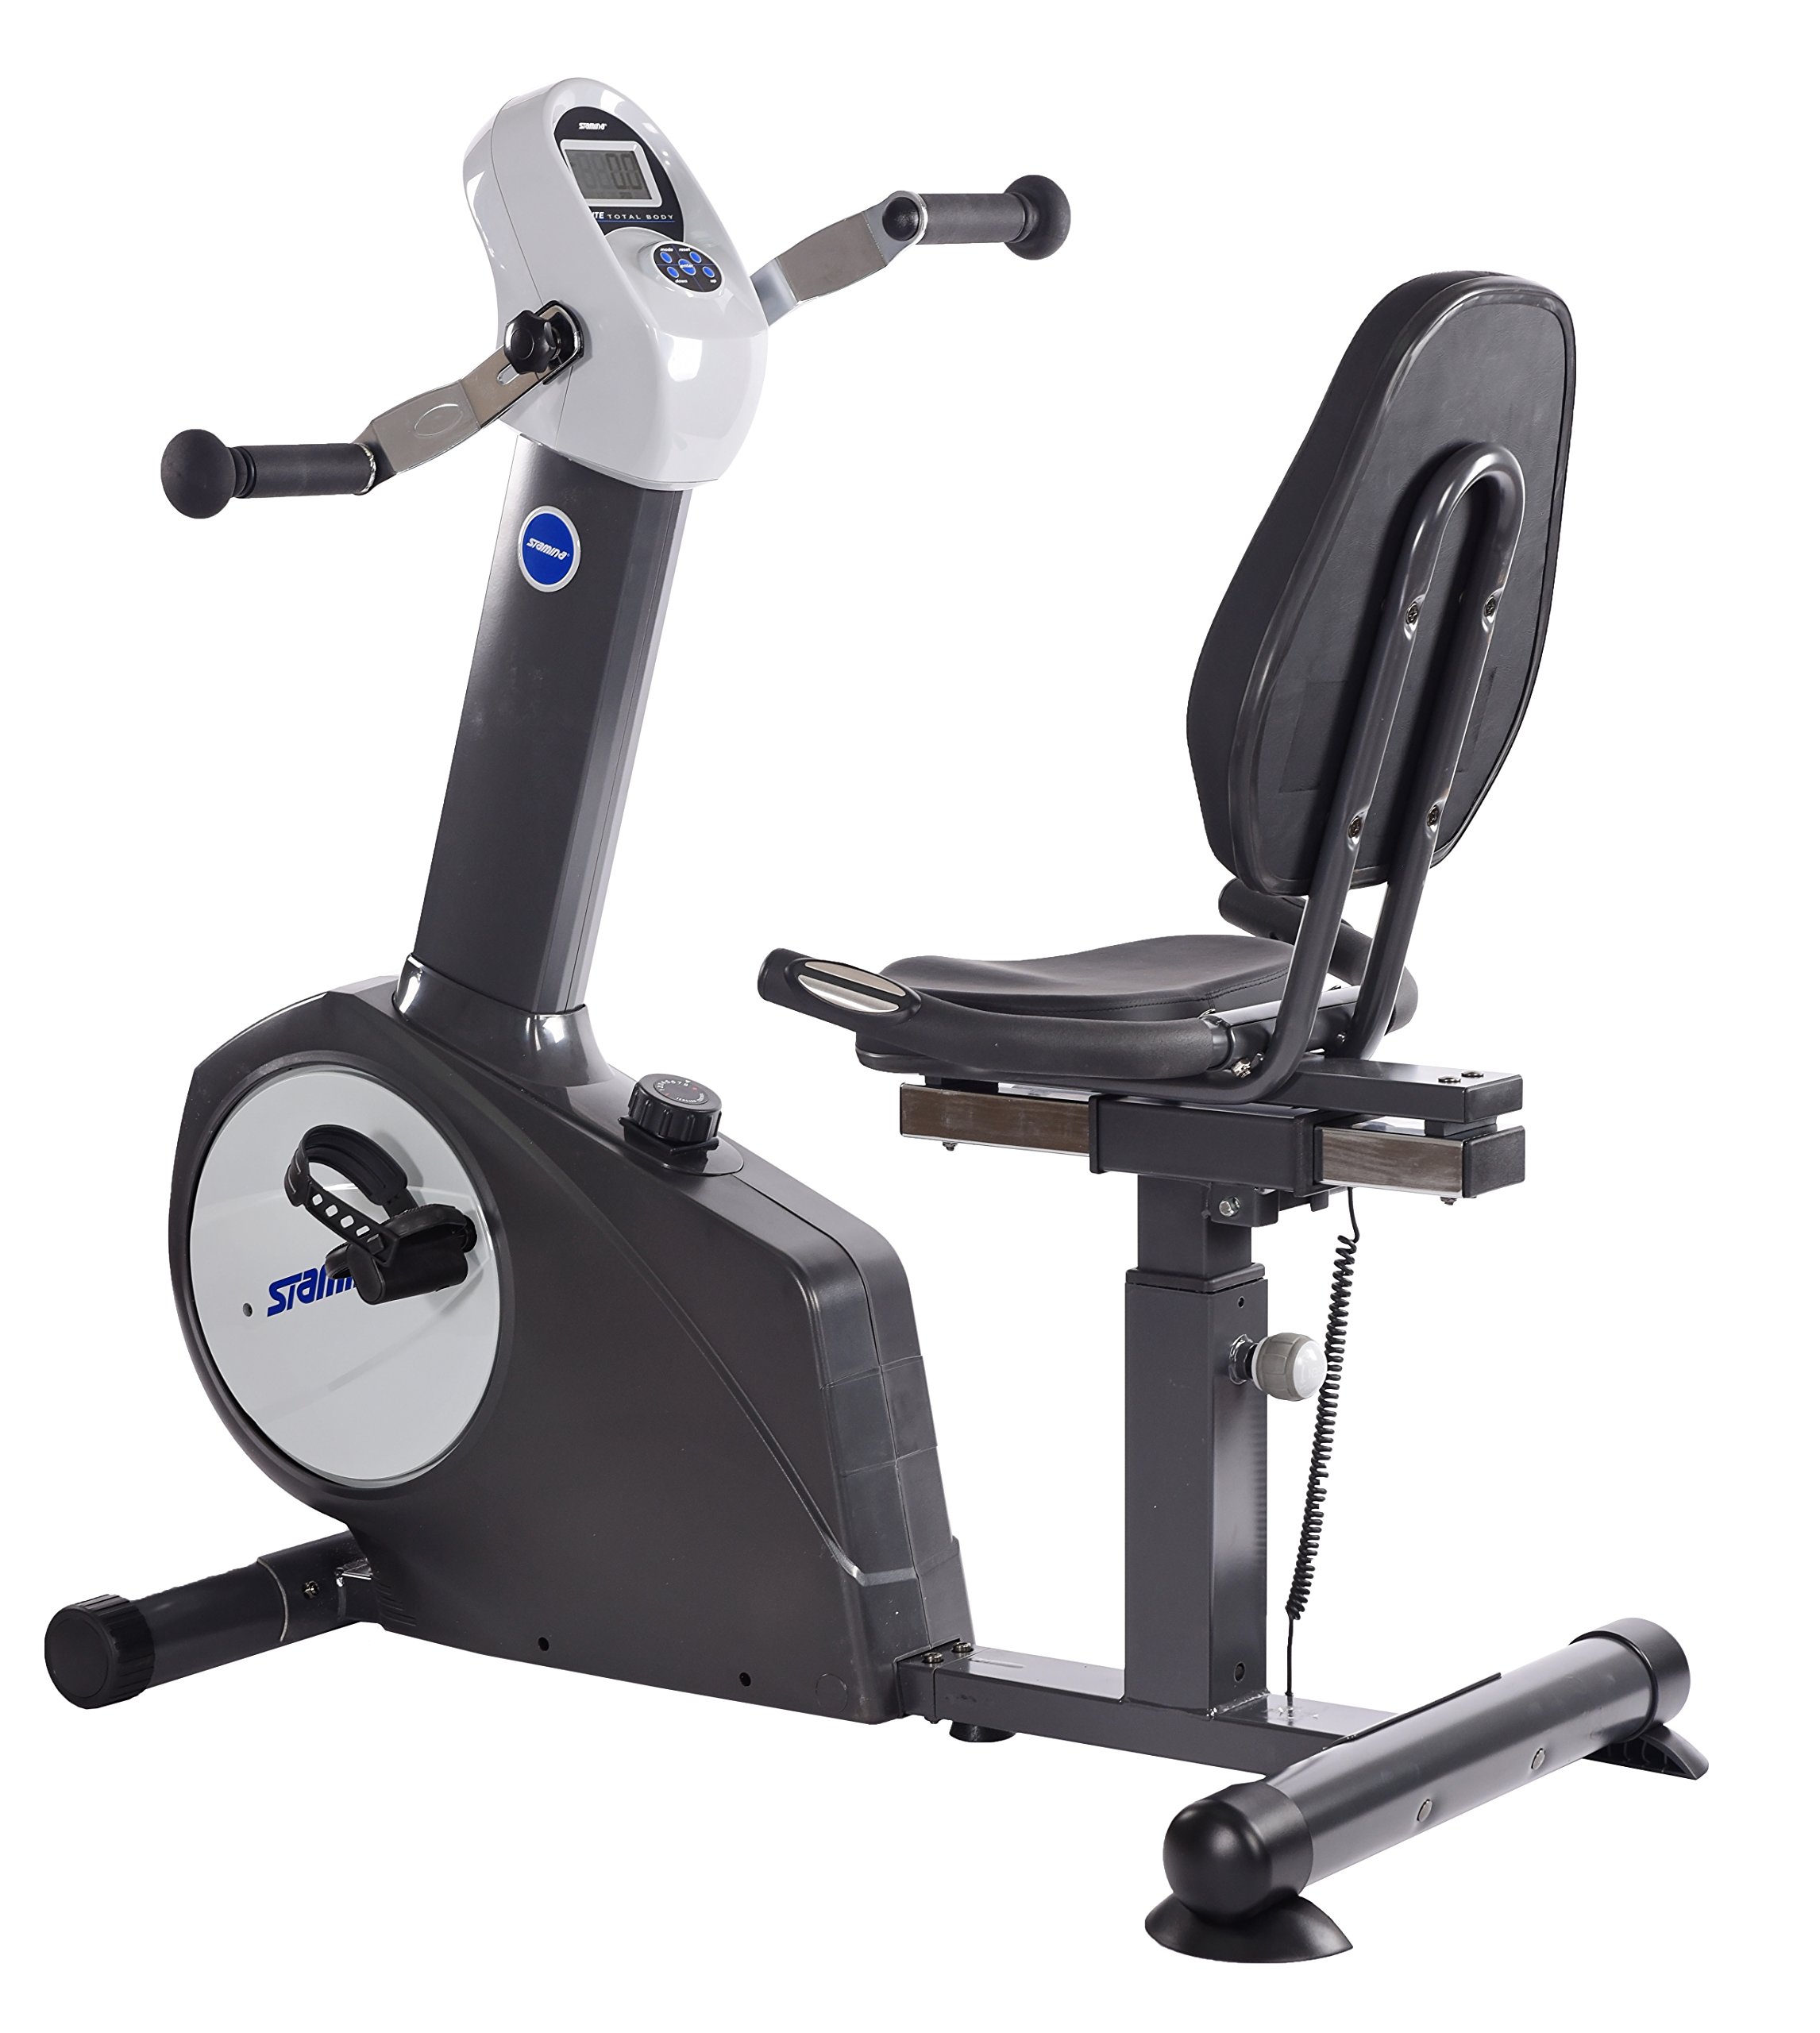 Stamina Elite Total Body Recumbent Exercise Bike w with Arm Exerciser & Smart Workout App, No Subscription Required - Stationary